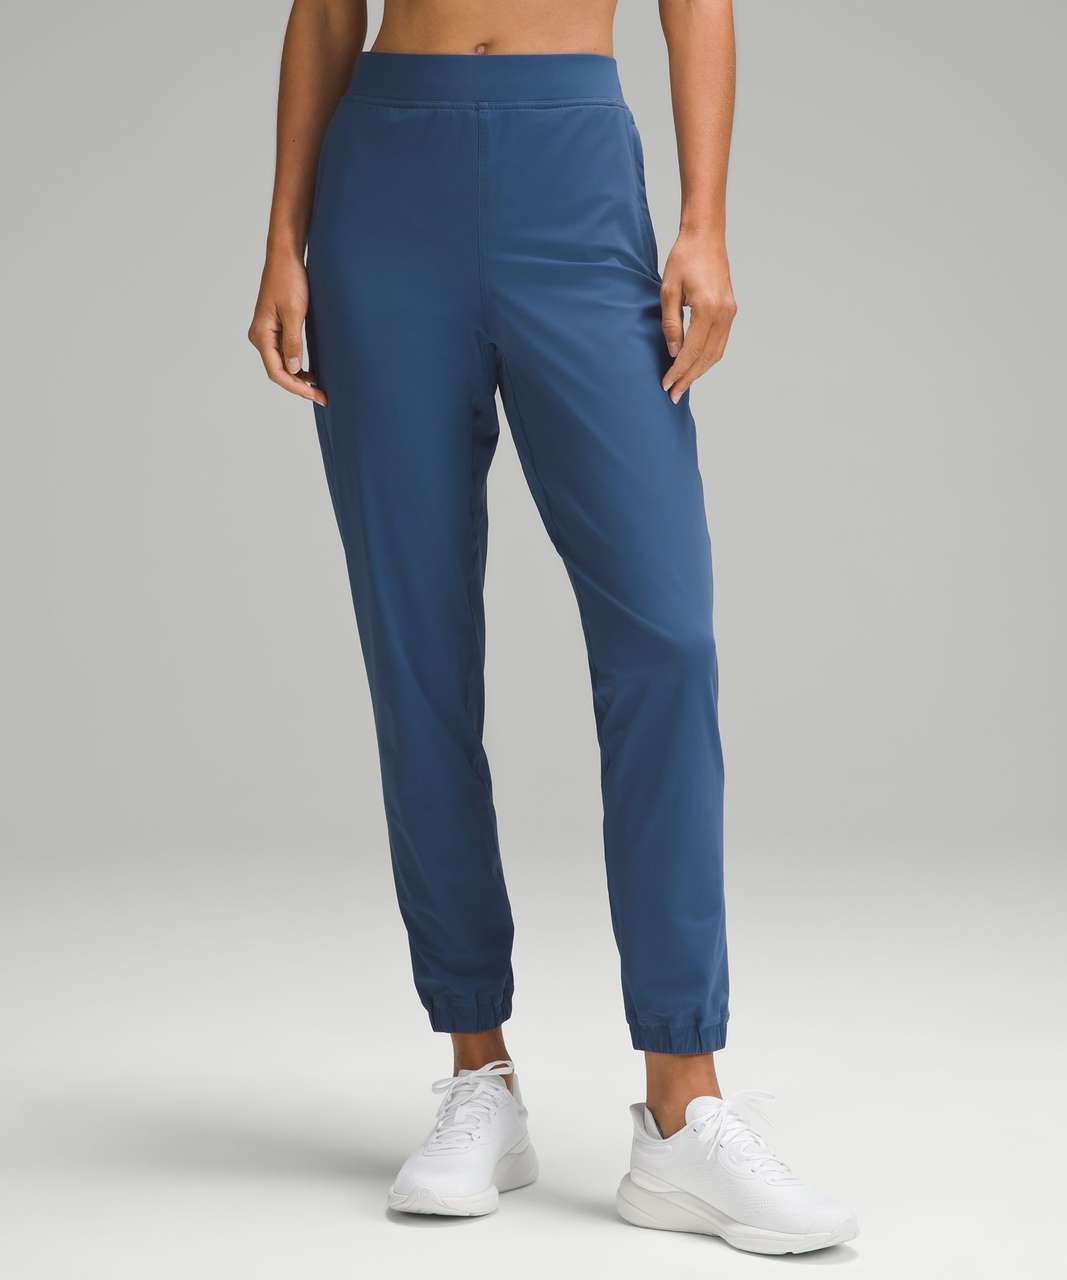 Lululemon Adapted State High-Rise Jogger *Full Length - Pitch Blue